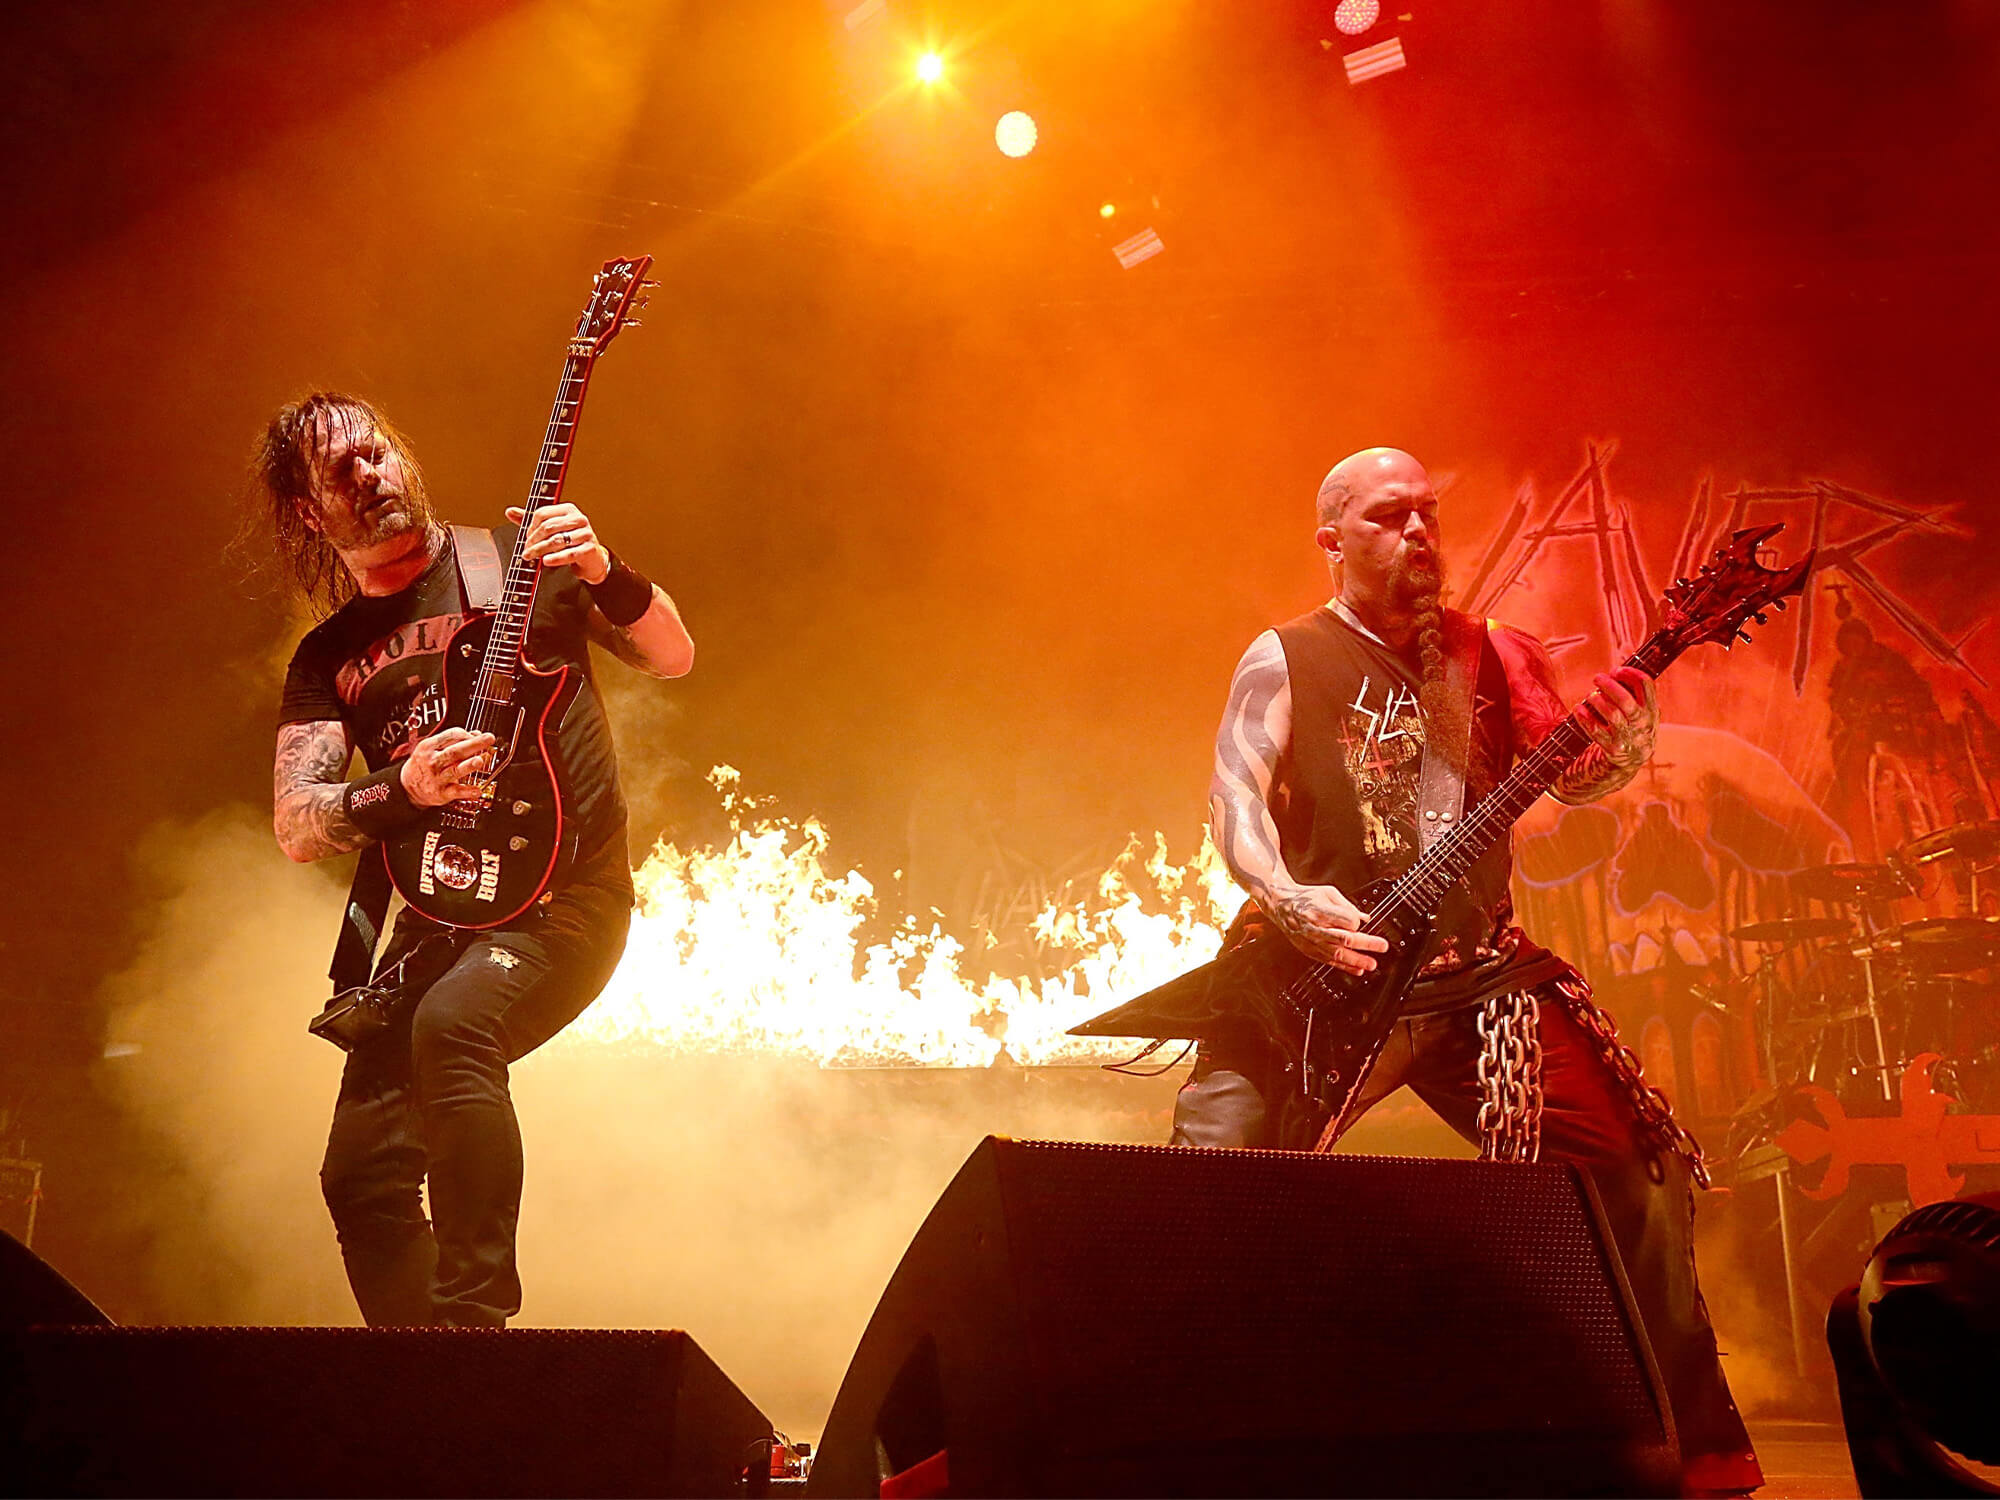 Gary Holt and Kerry King on stage in 2015. They're both playing guitar and standing in front of a flaming background.